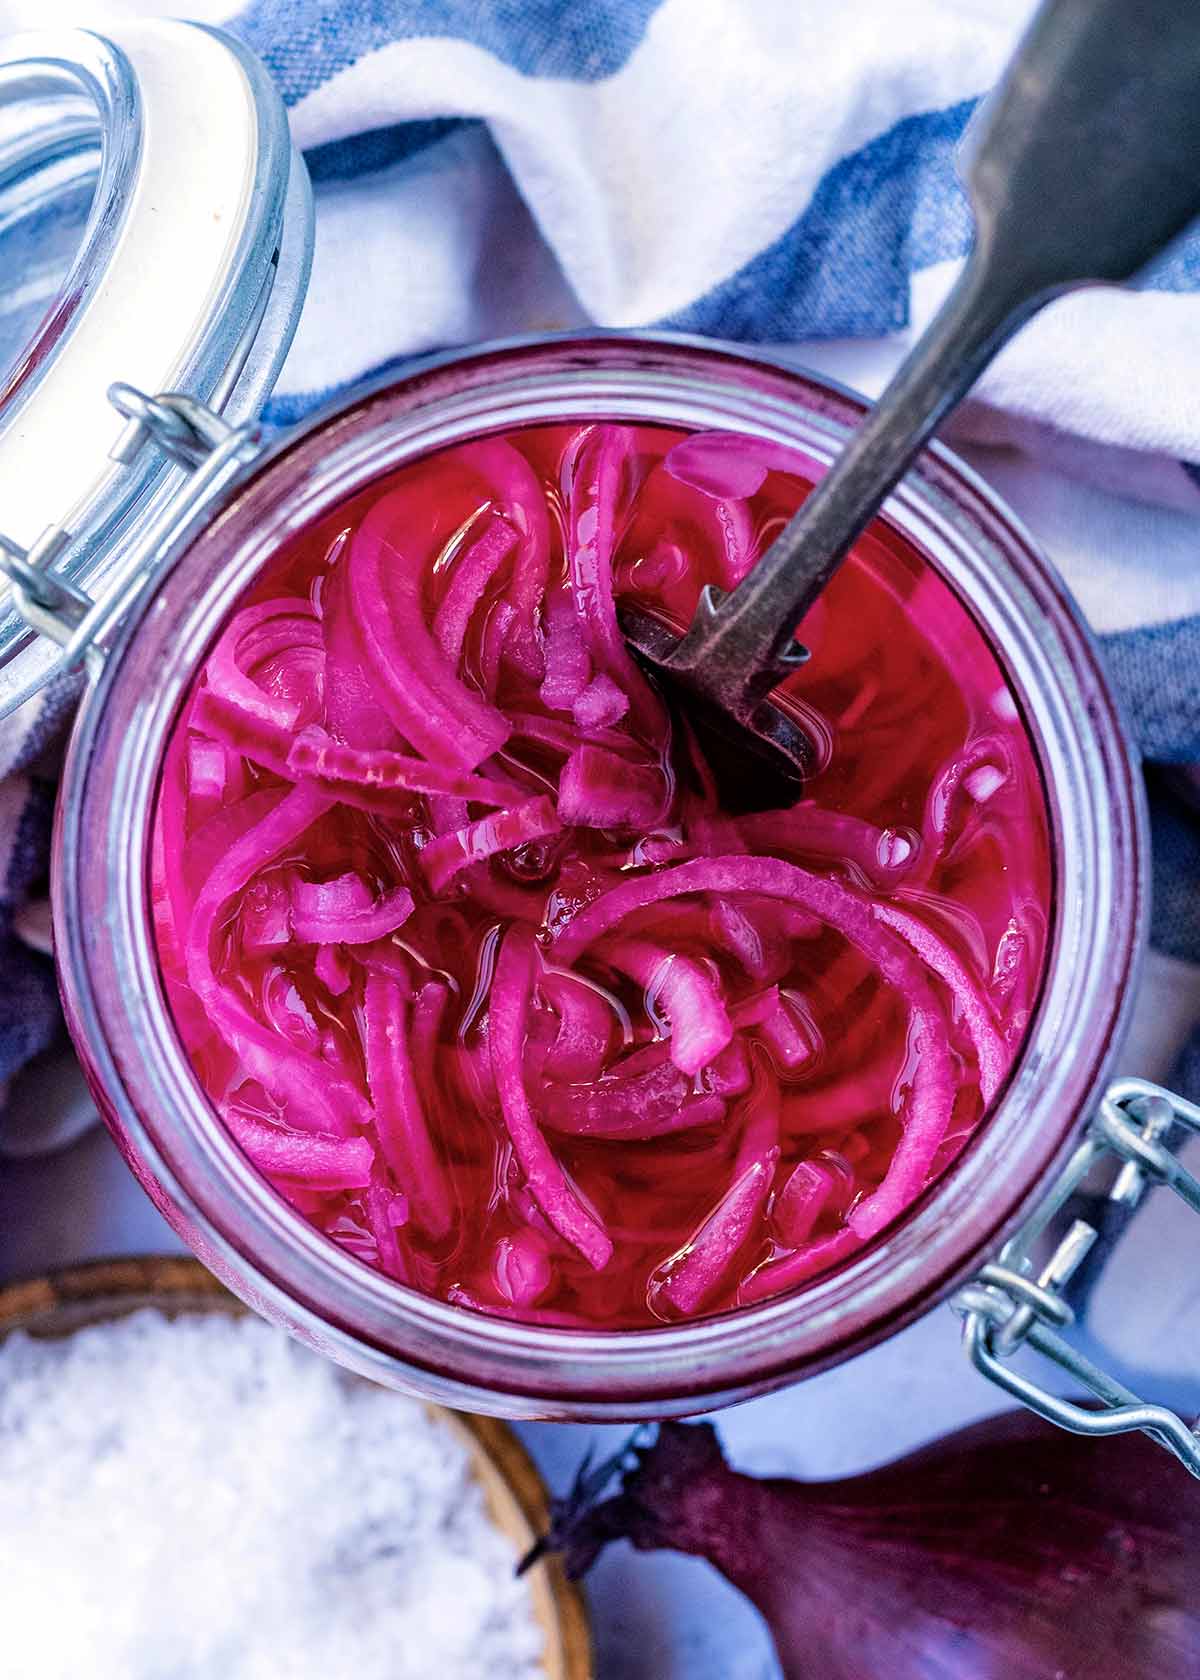 A jar of sliced red onions as viewed from above.